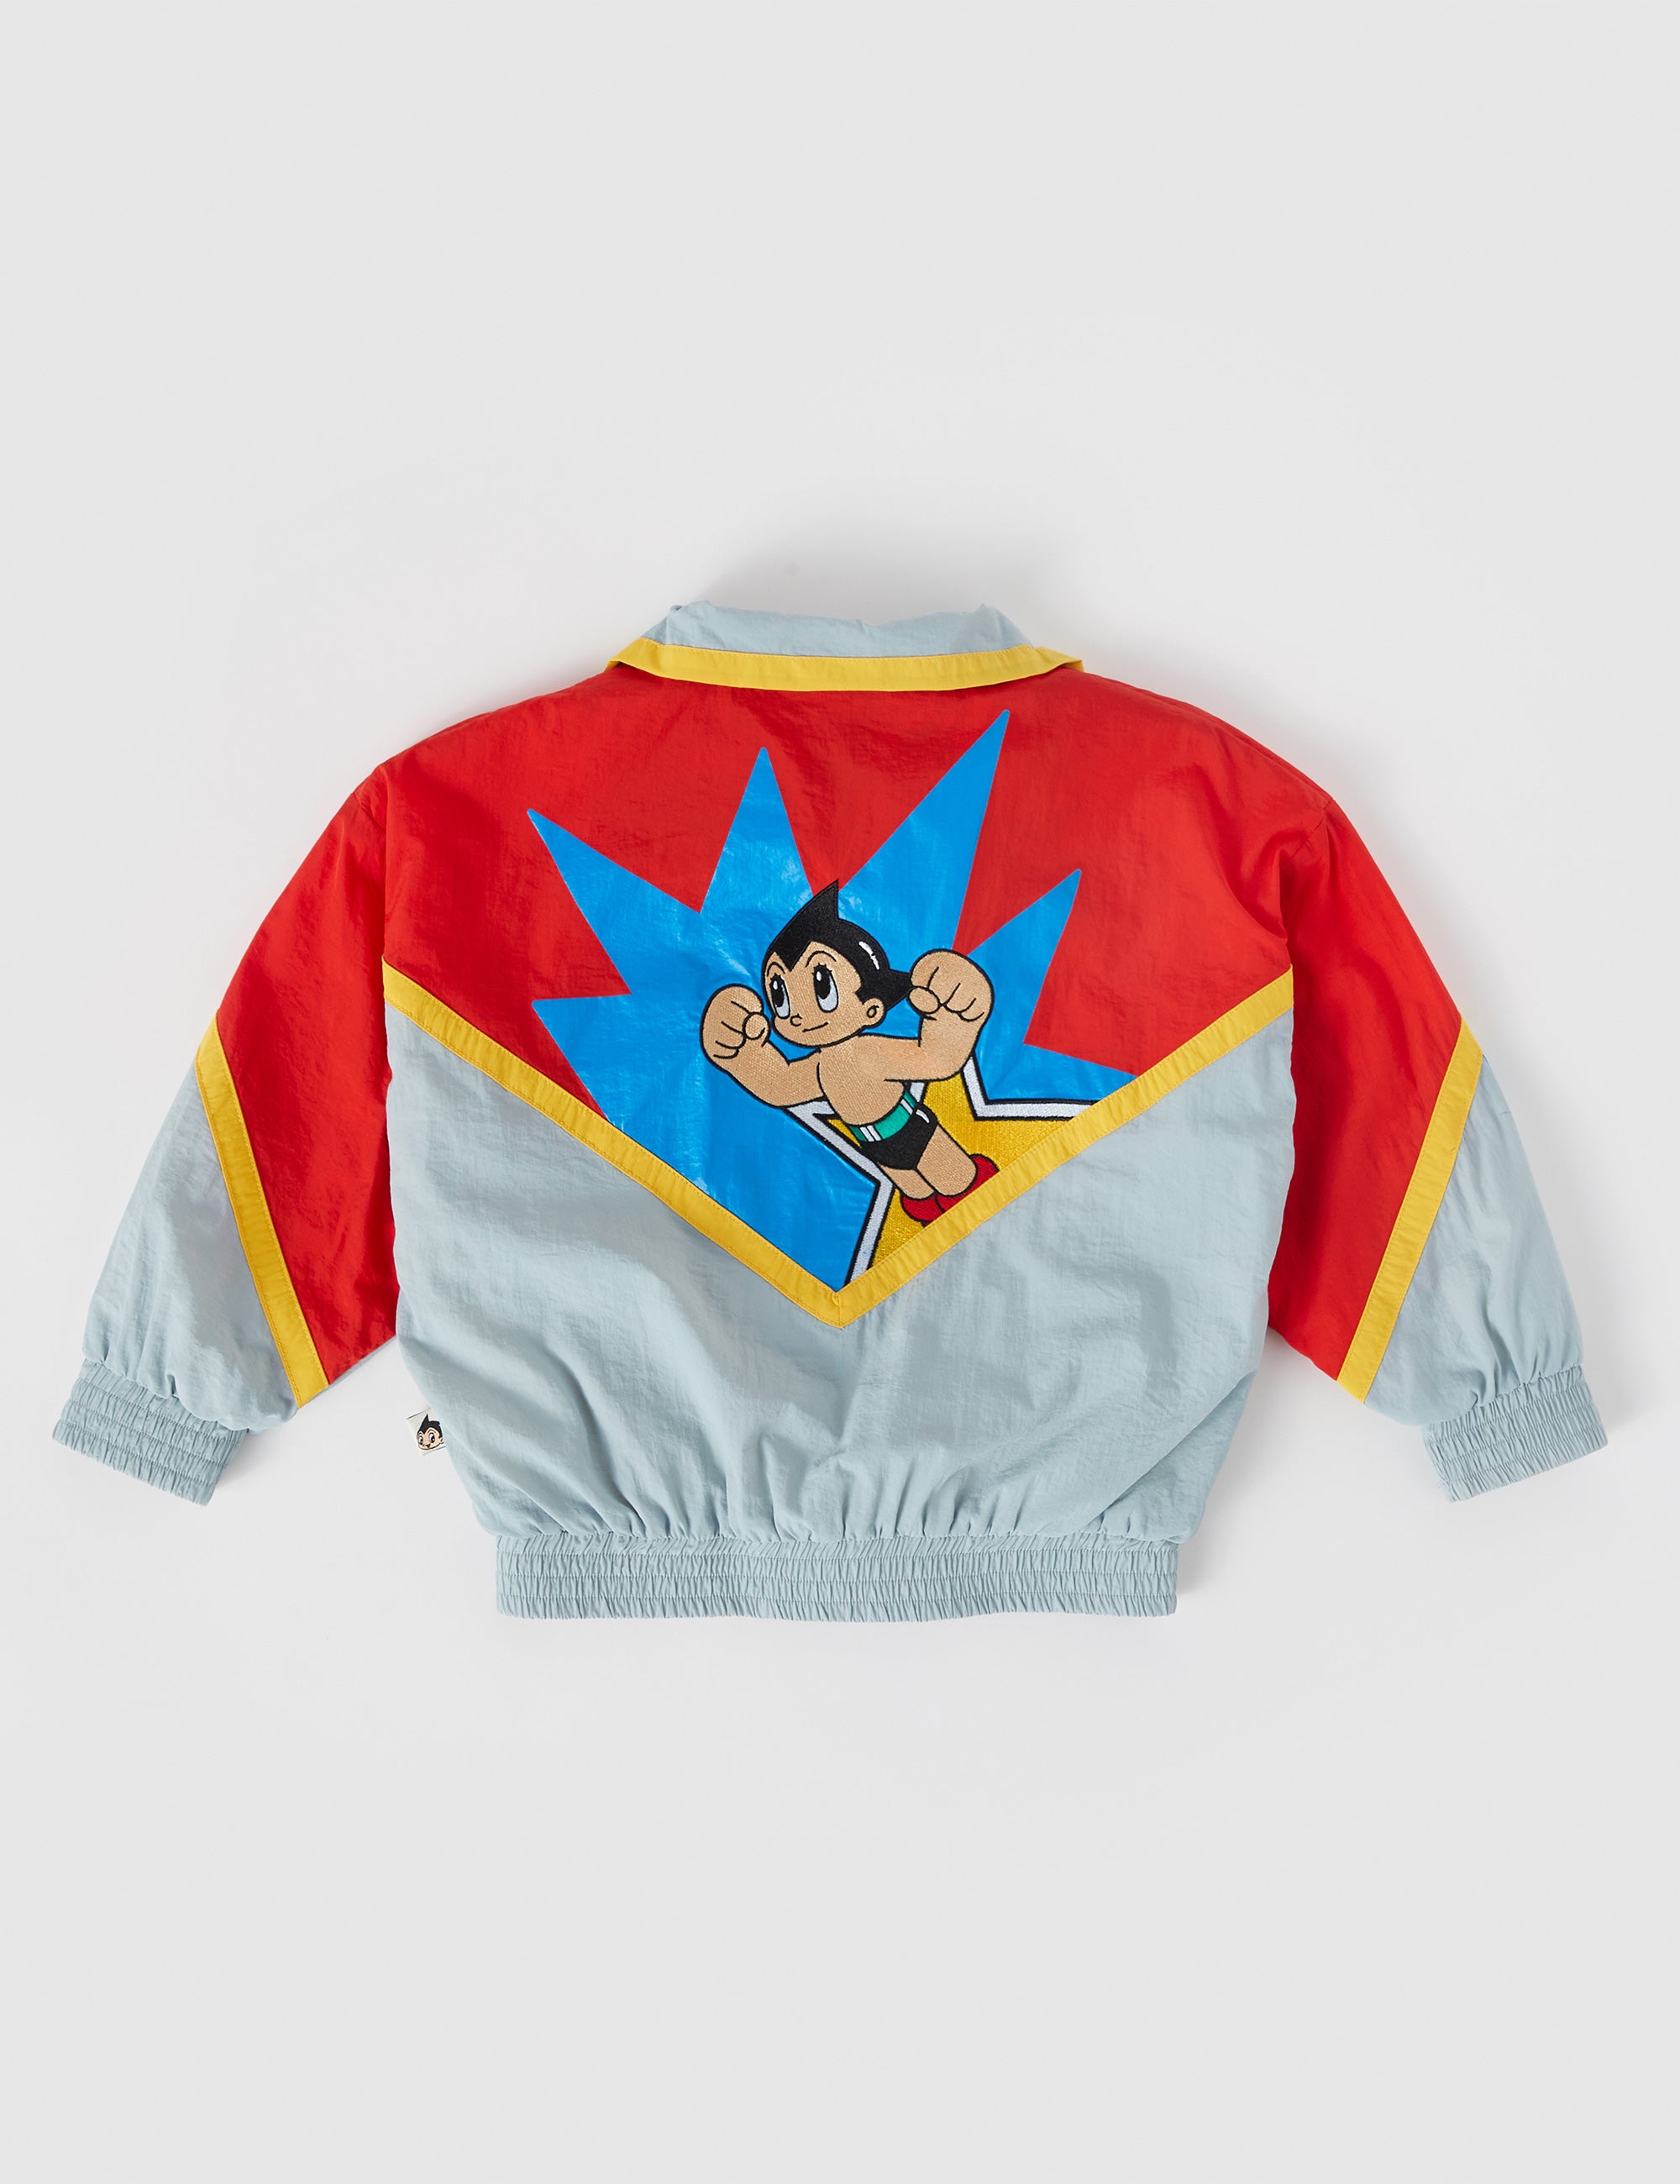 Astro Boy The Mighty Atom Parachute Jacket - Goldie + Ace